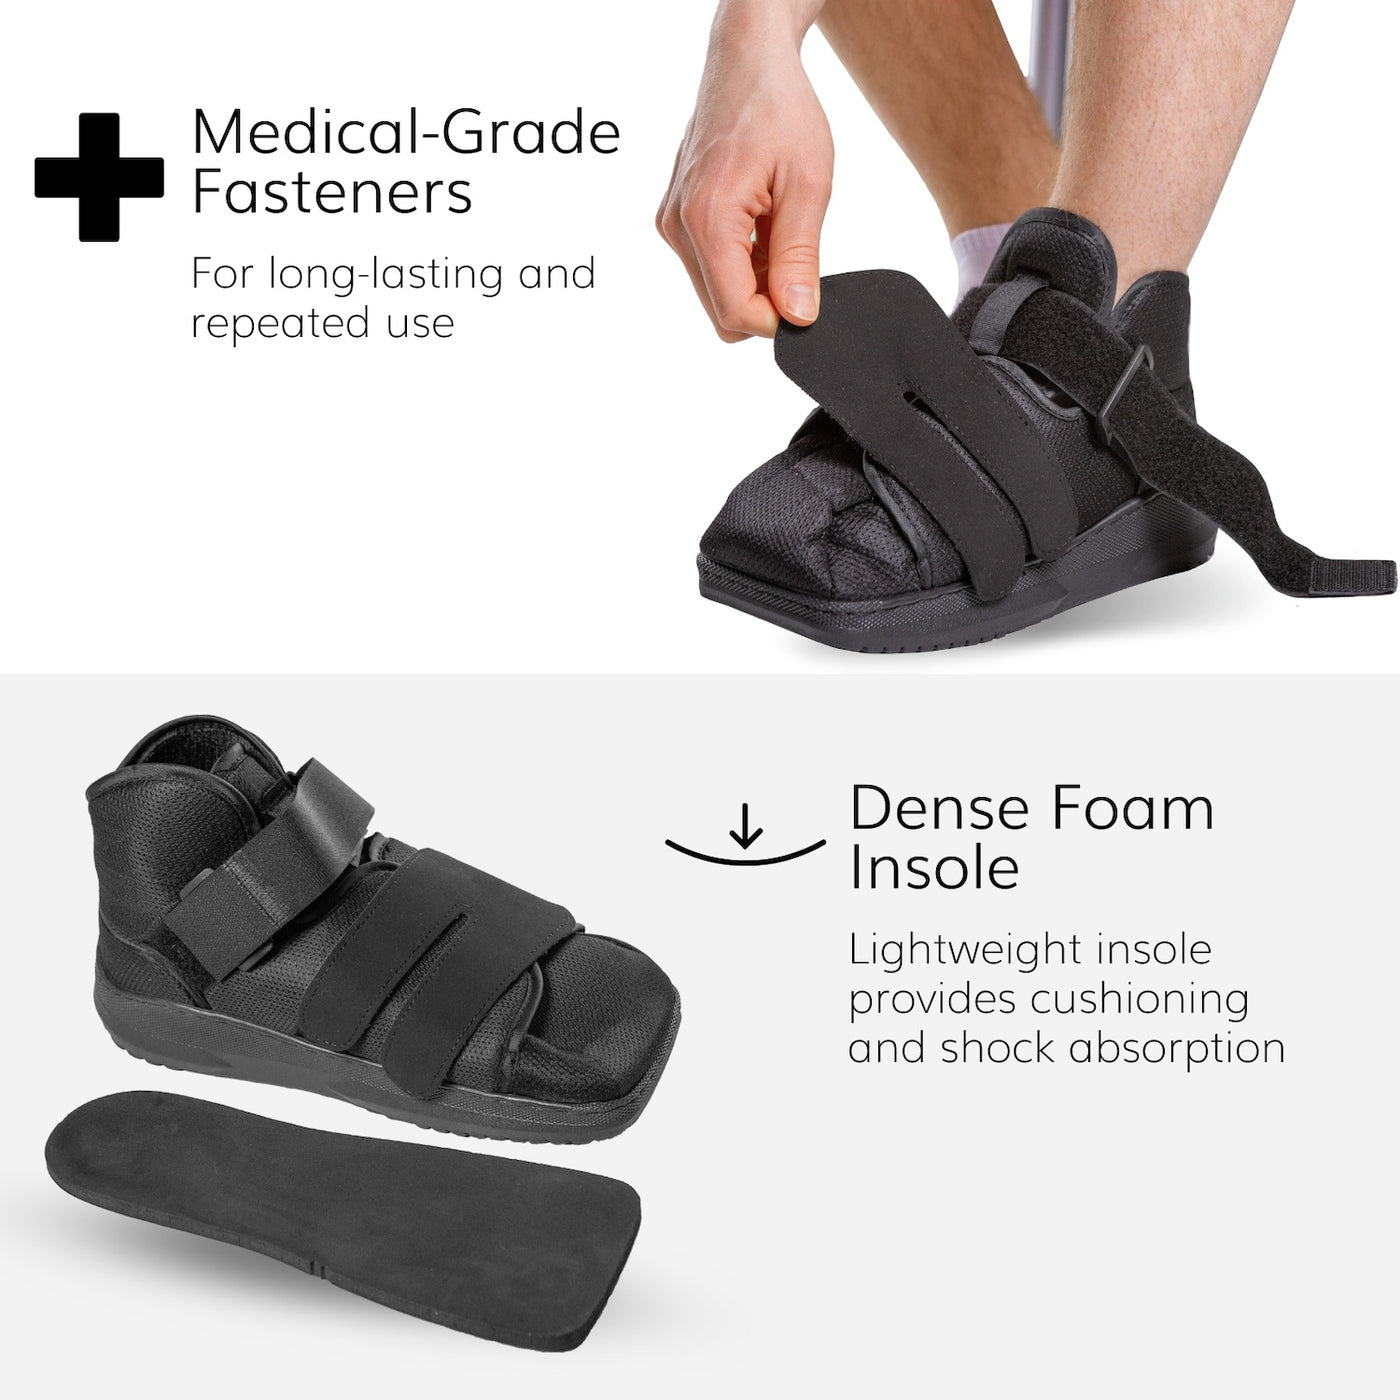 The BraceAbility fractured foot shoe is made with medical-grade fasteners for long-lasting and repeated use